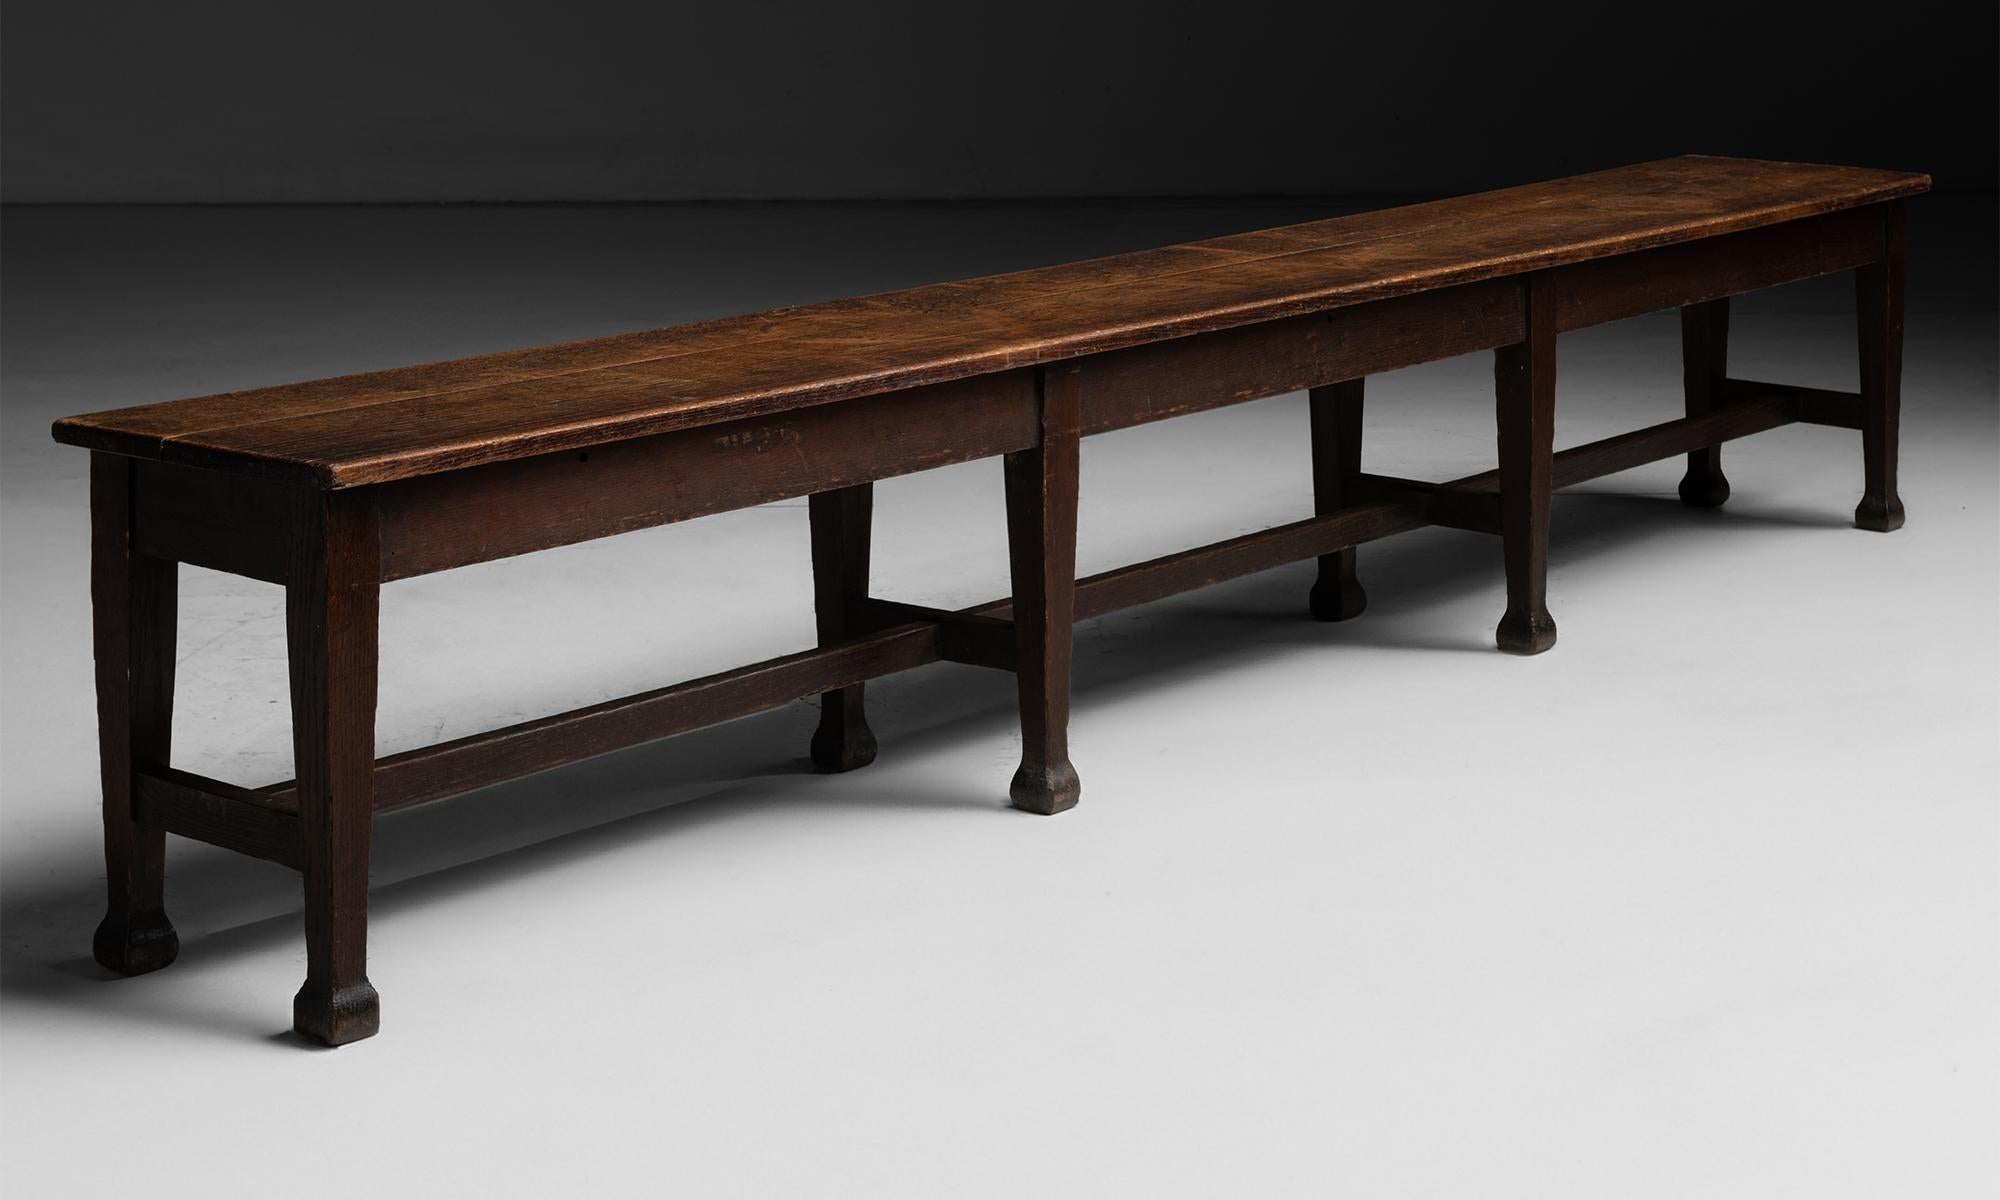 England circa 1890

8 Leg hall bench constructed in oak, with plank top and tapered legs.

08”L x 15”d x 19”h